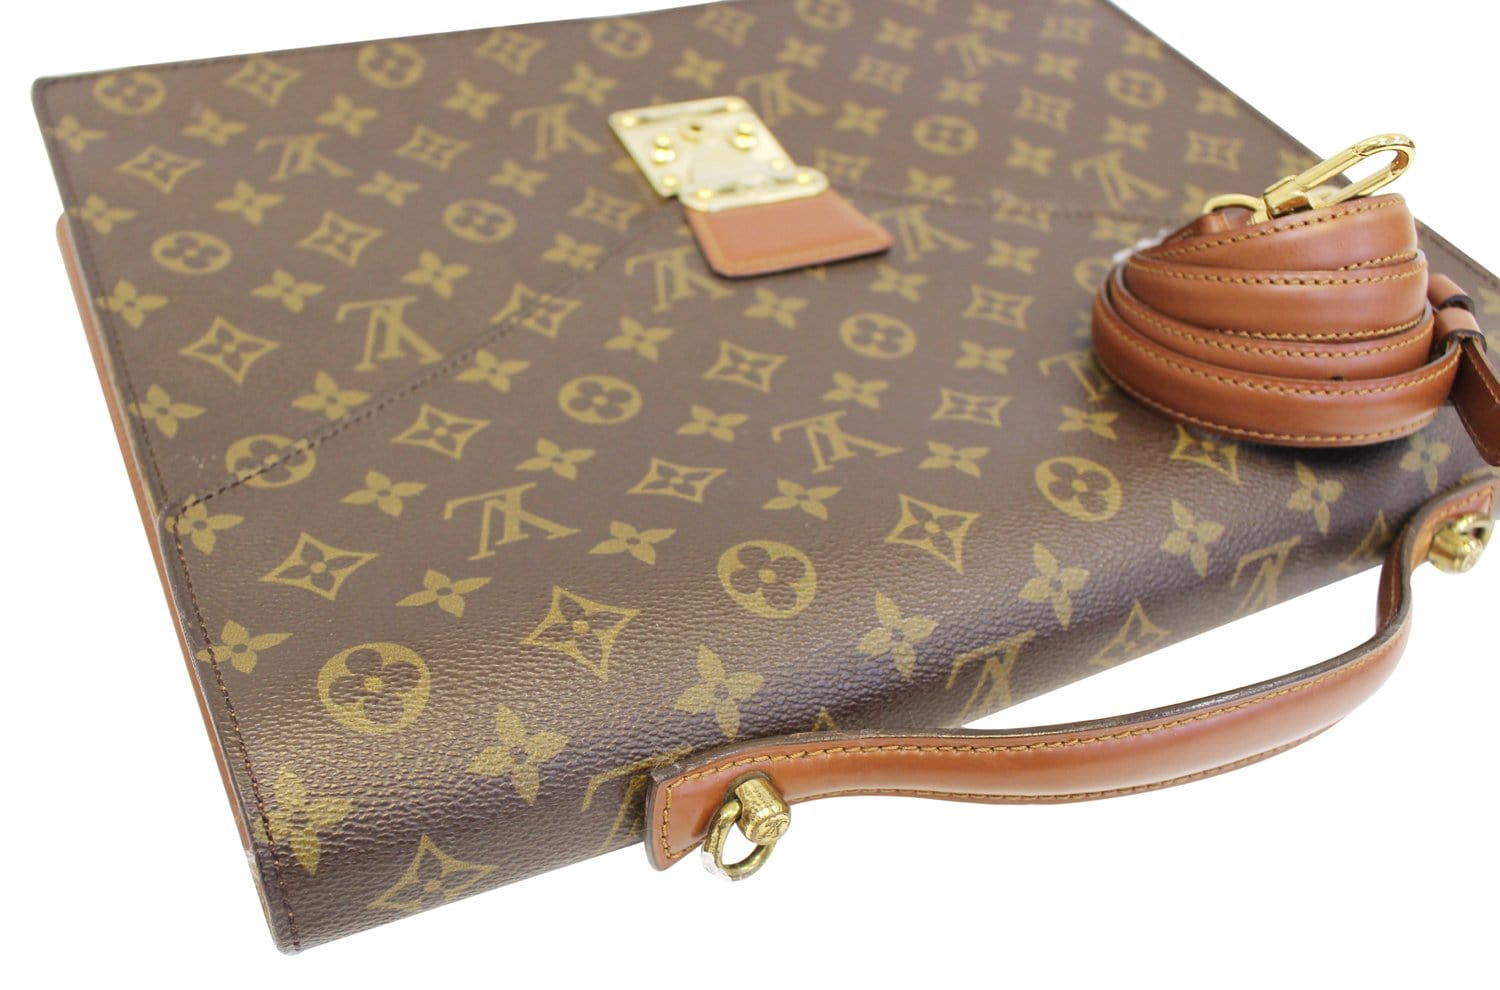 Shop Louis Vuitton Business & Briefcases (M46457) by SolidConnection